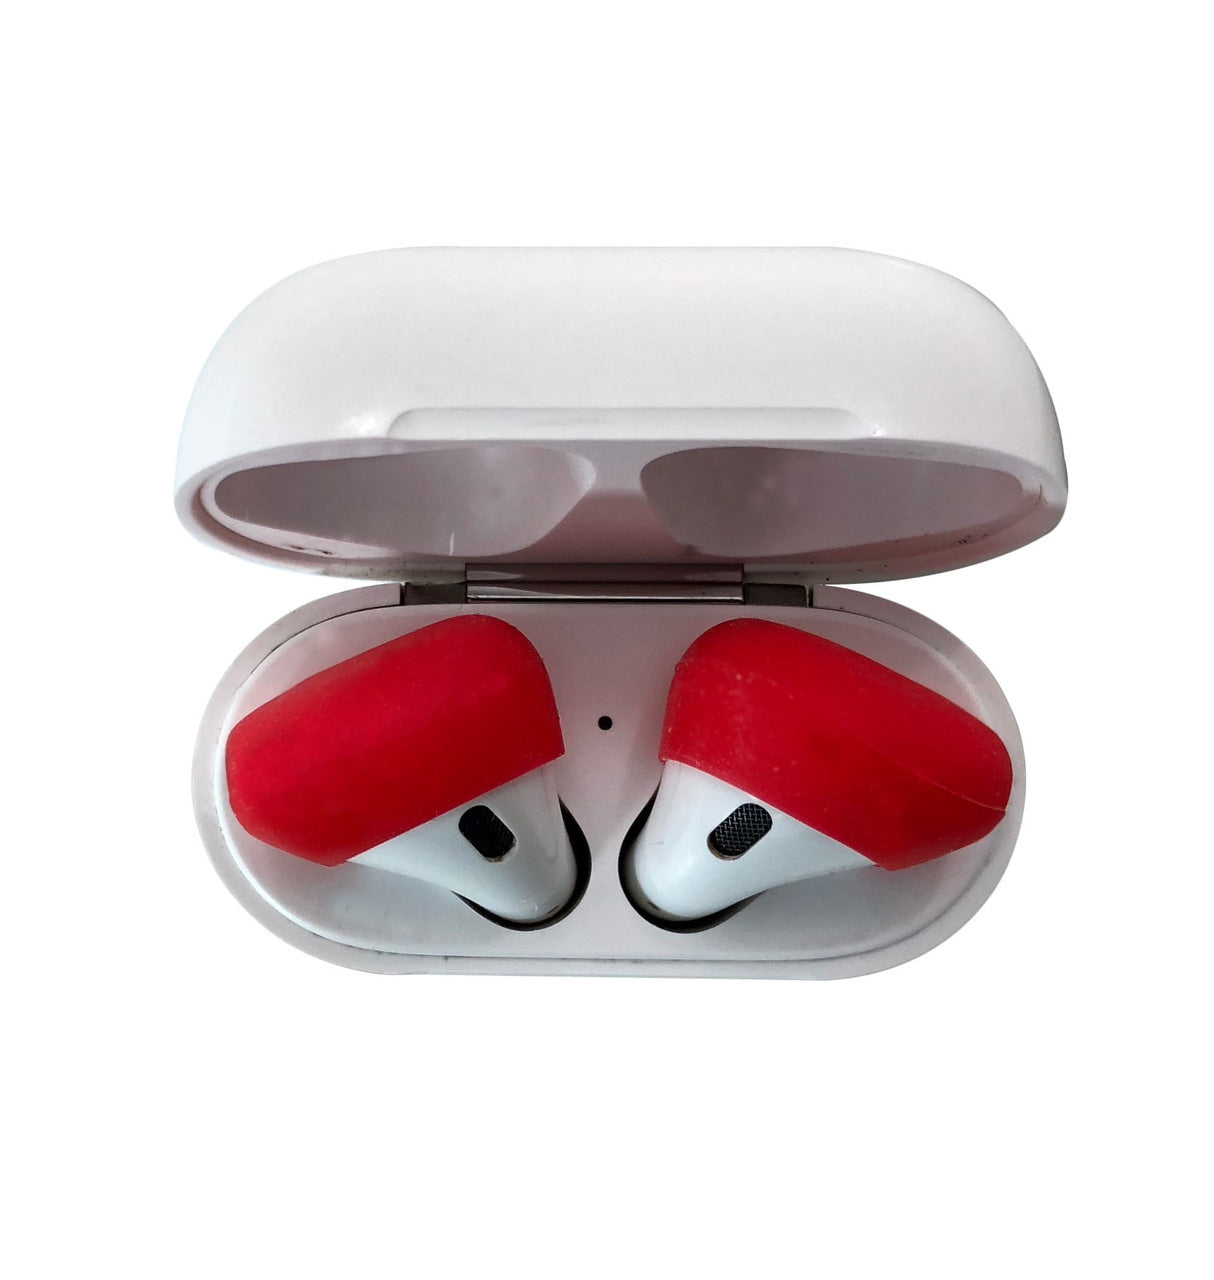 AERZ - AirPods & Apple Earbuds Skins Covers

* Soft high quality silicone cover skins improve the comfort of Apple AirPods and Apple Earbuds 2.0 allowing you to wear your AirPods or Earbuds for hours on end without discomfort
